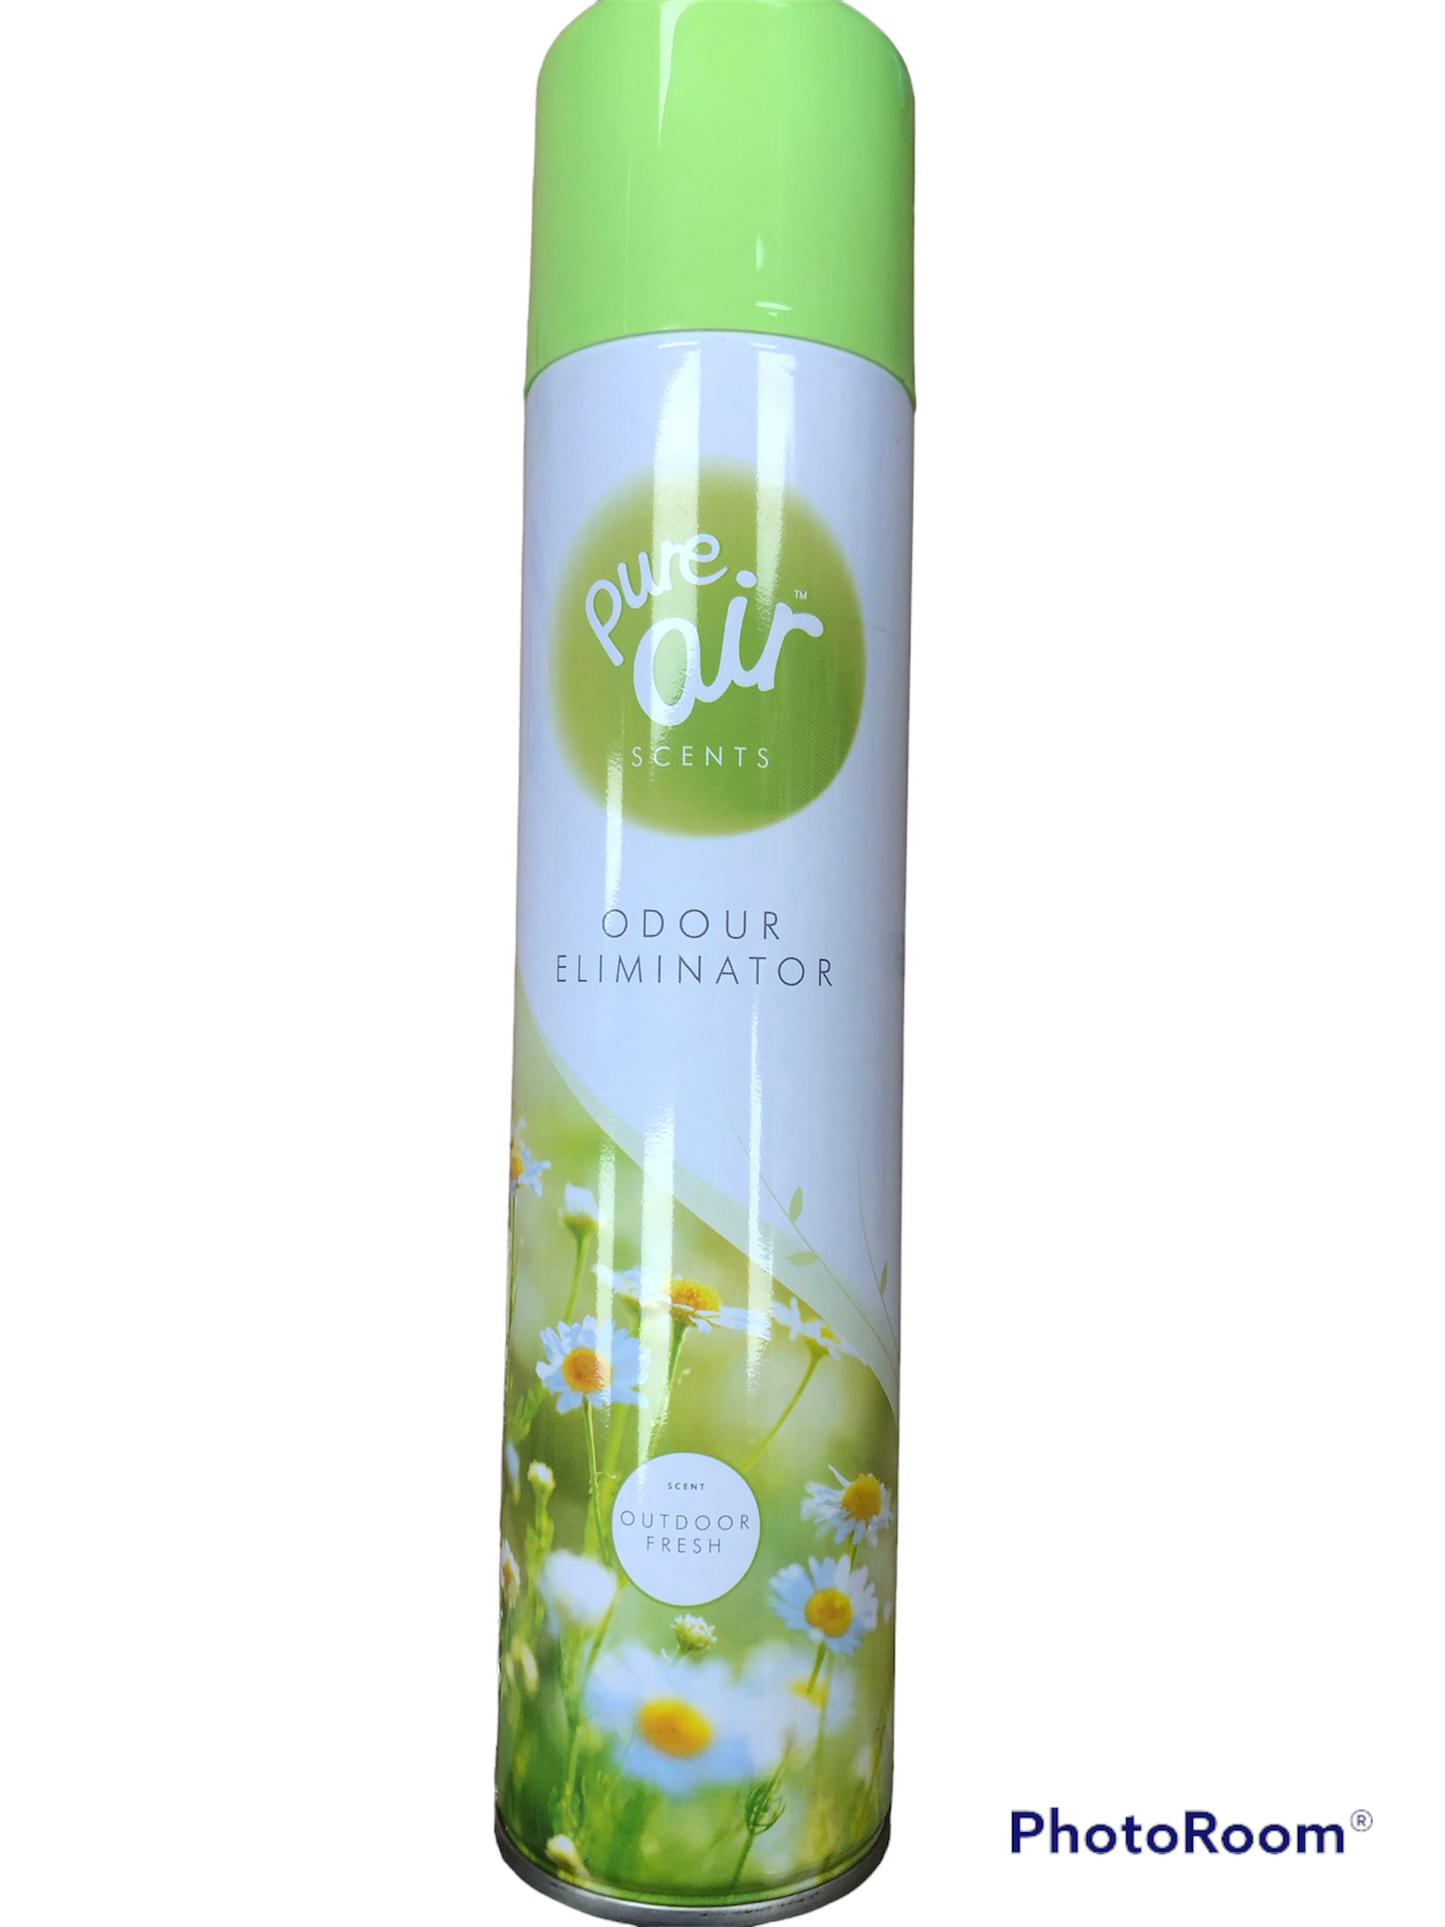 Pure Air scents. Outdoor fresh spray 350ml